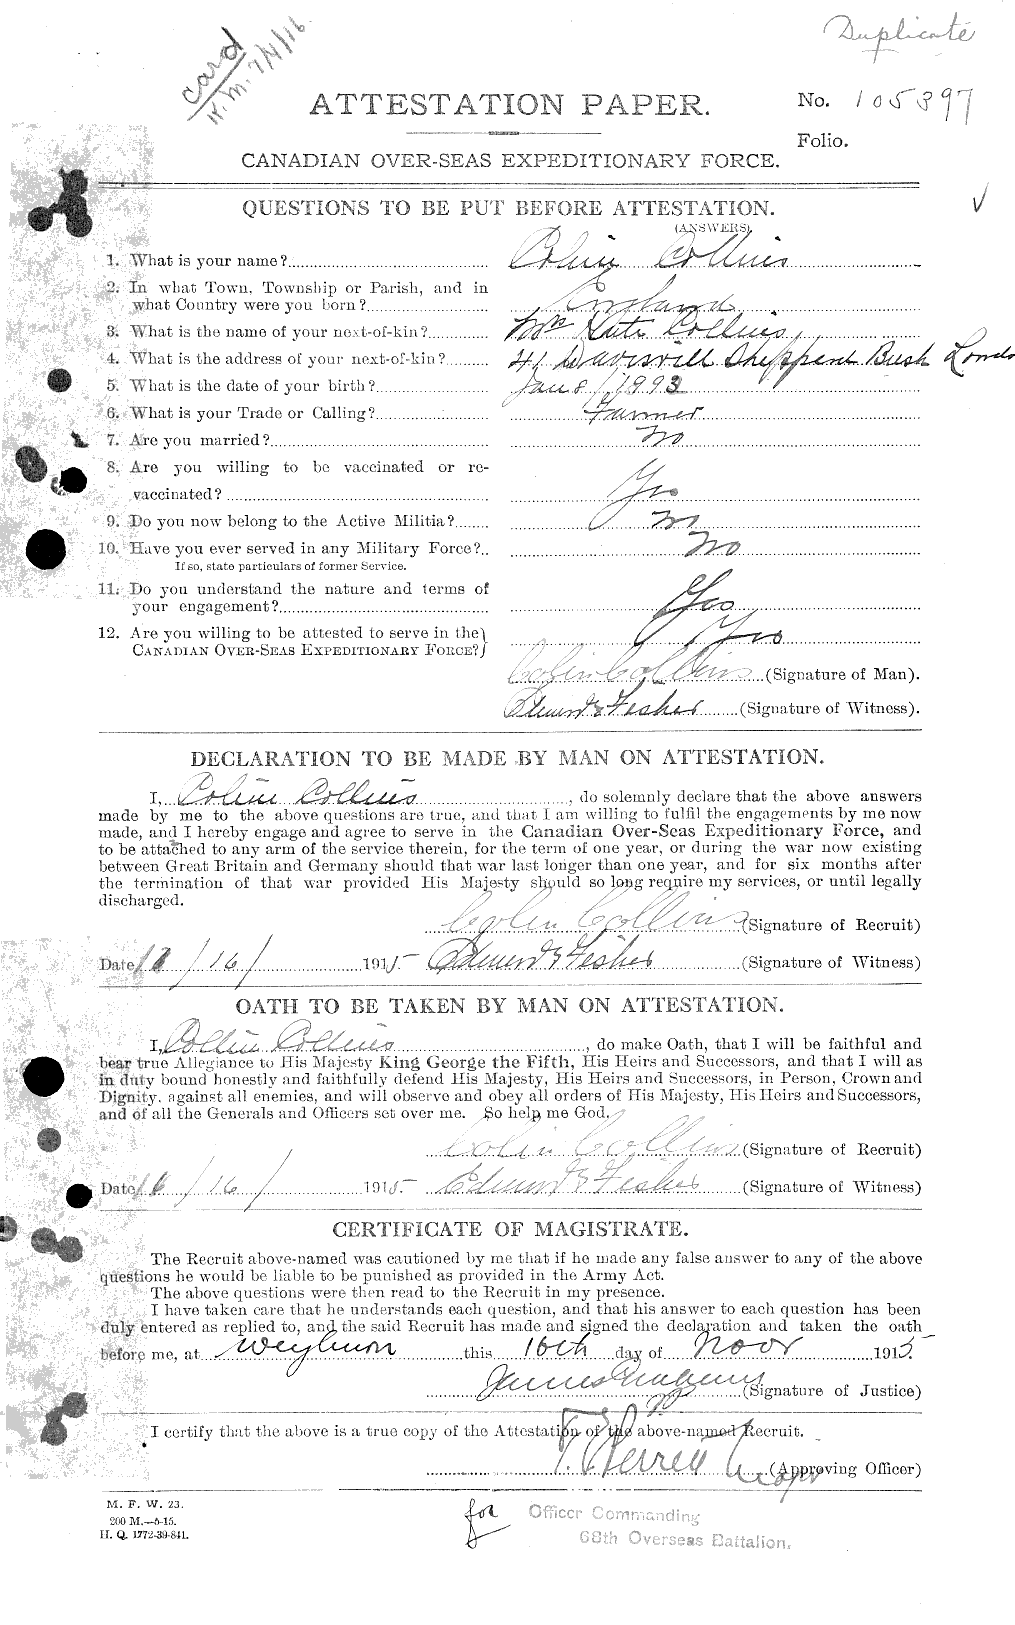 Personnel Records of the First World War - CEF 029057a